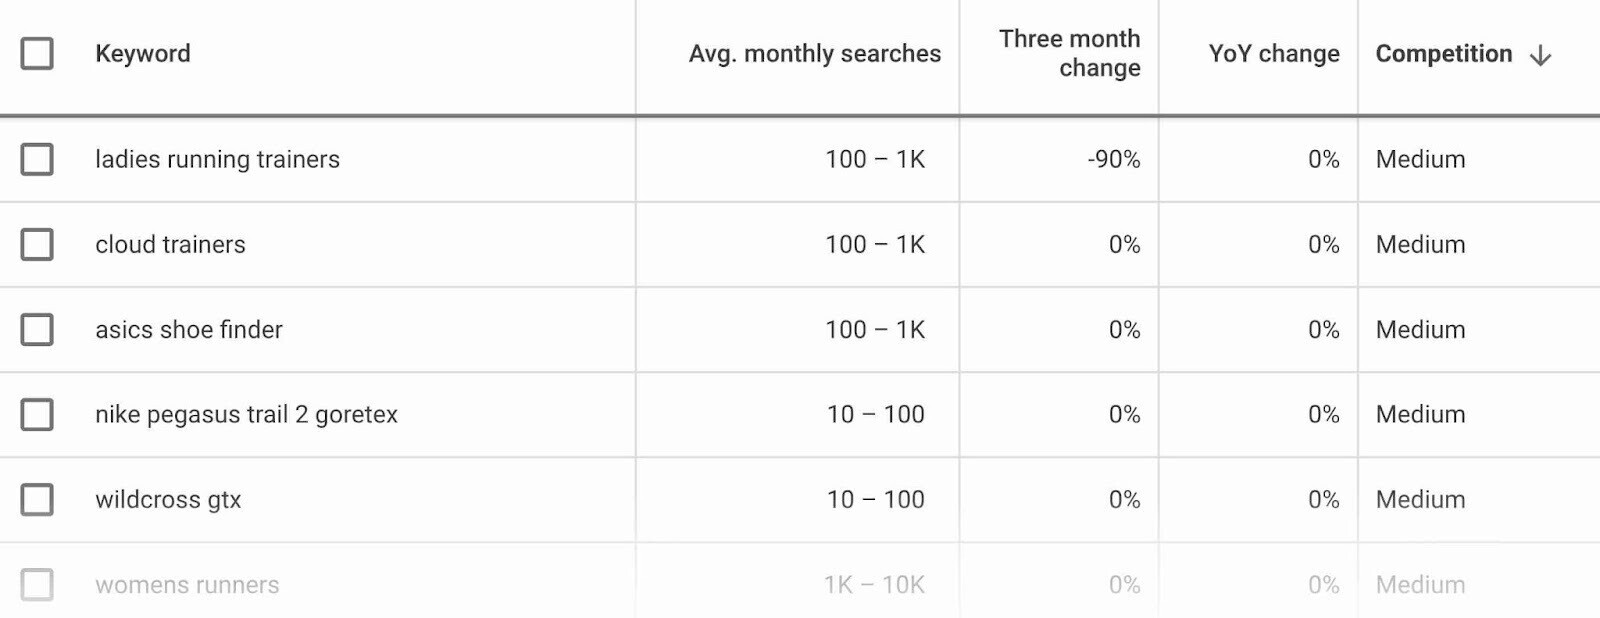 Sort your list by average monthly searches and target keywords with low competition